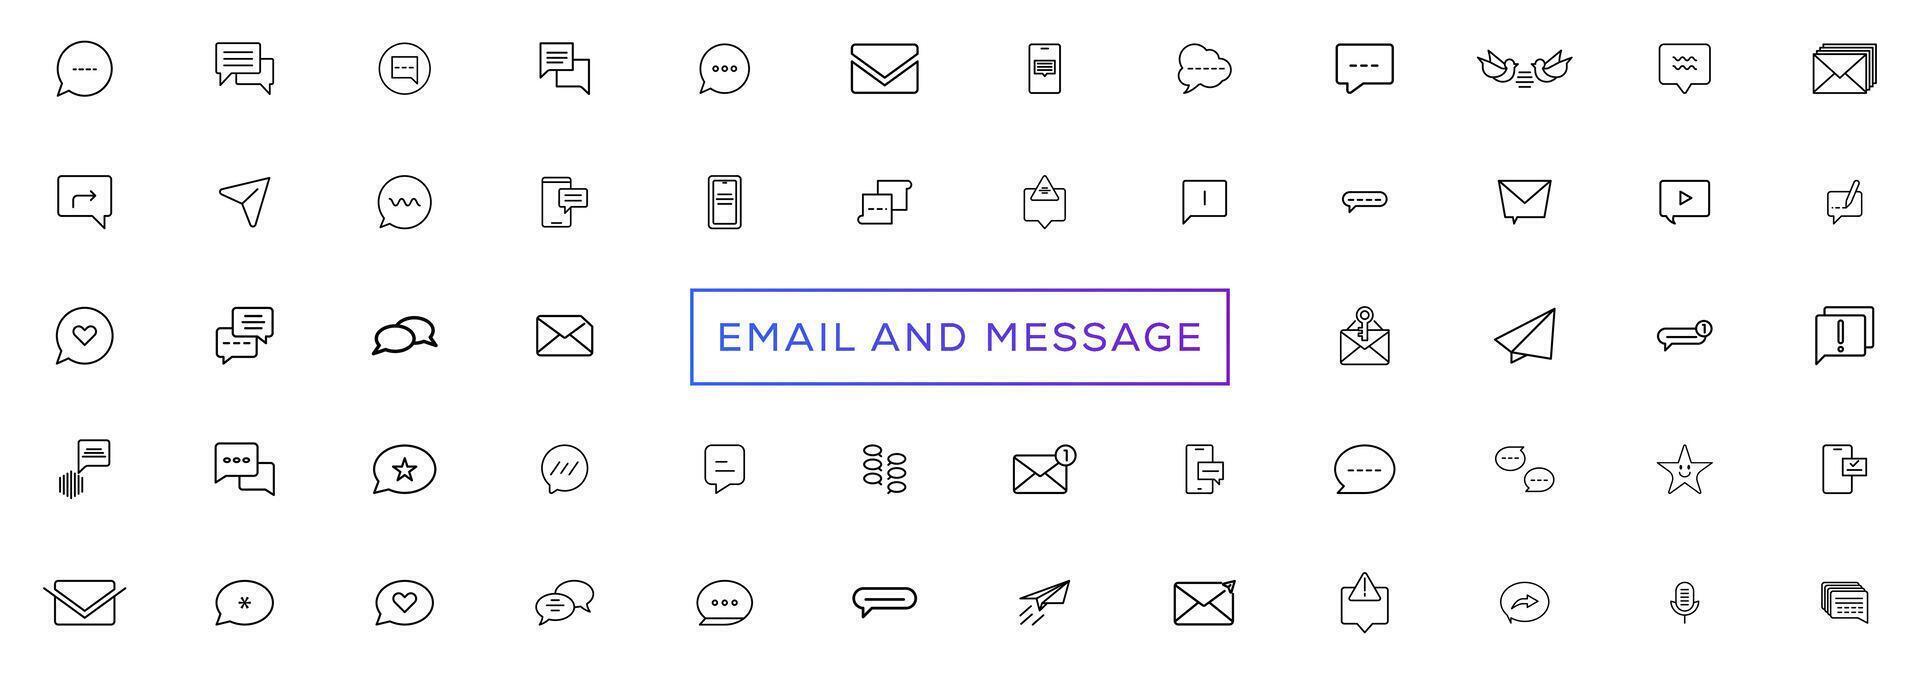 Contact icon set. Thin line Contact icons set. Contact symbols - Phone, mail, fax, info, e-mail, support... vector